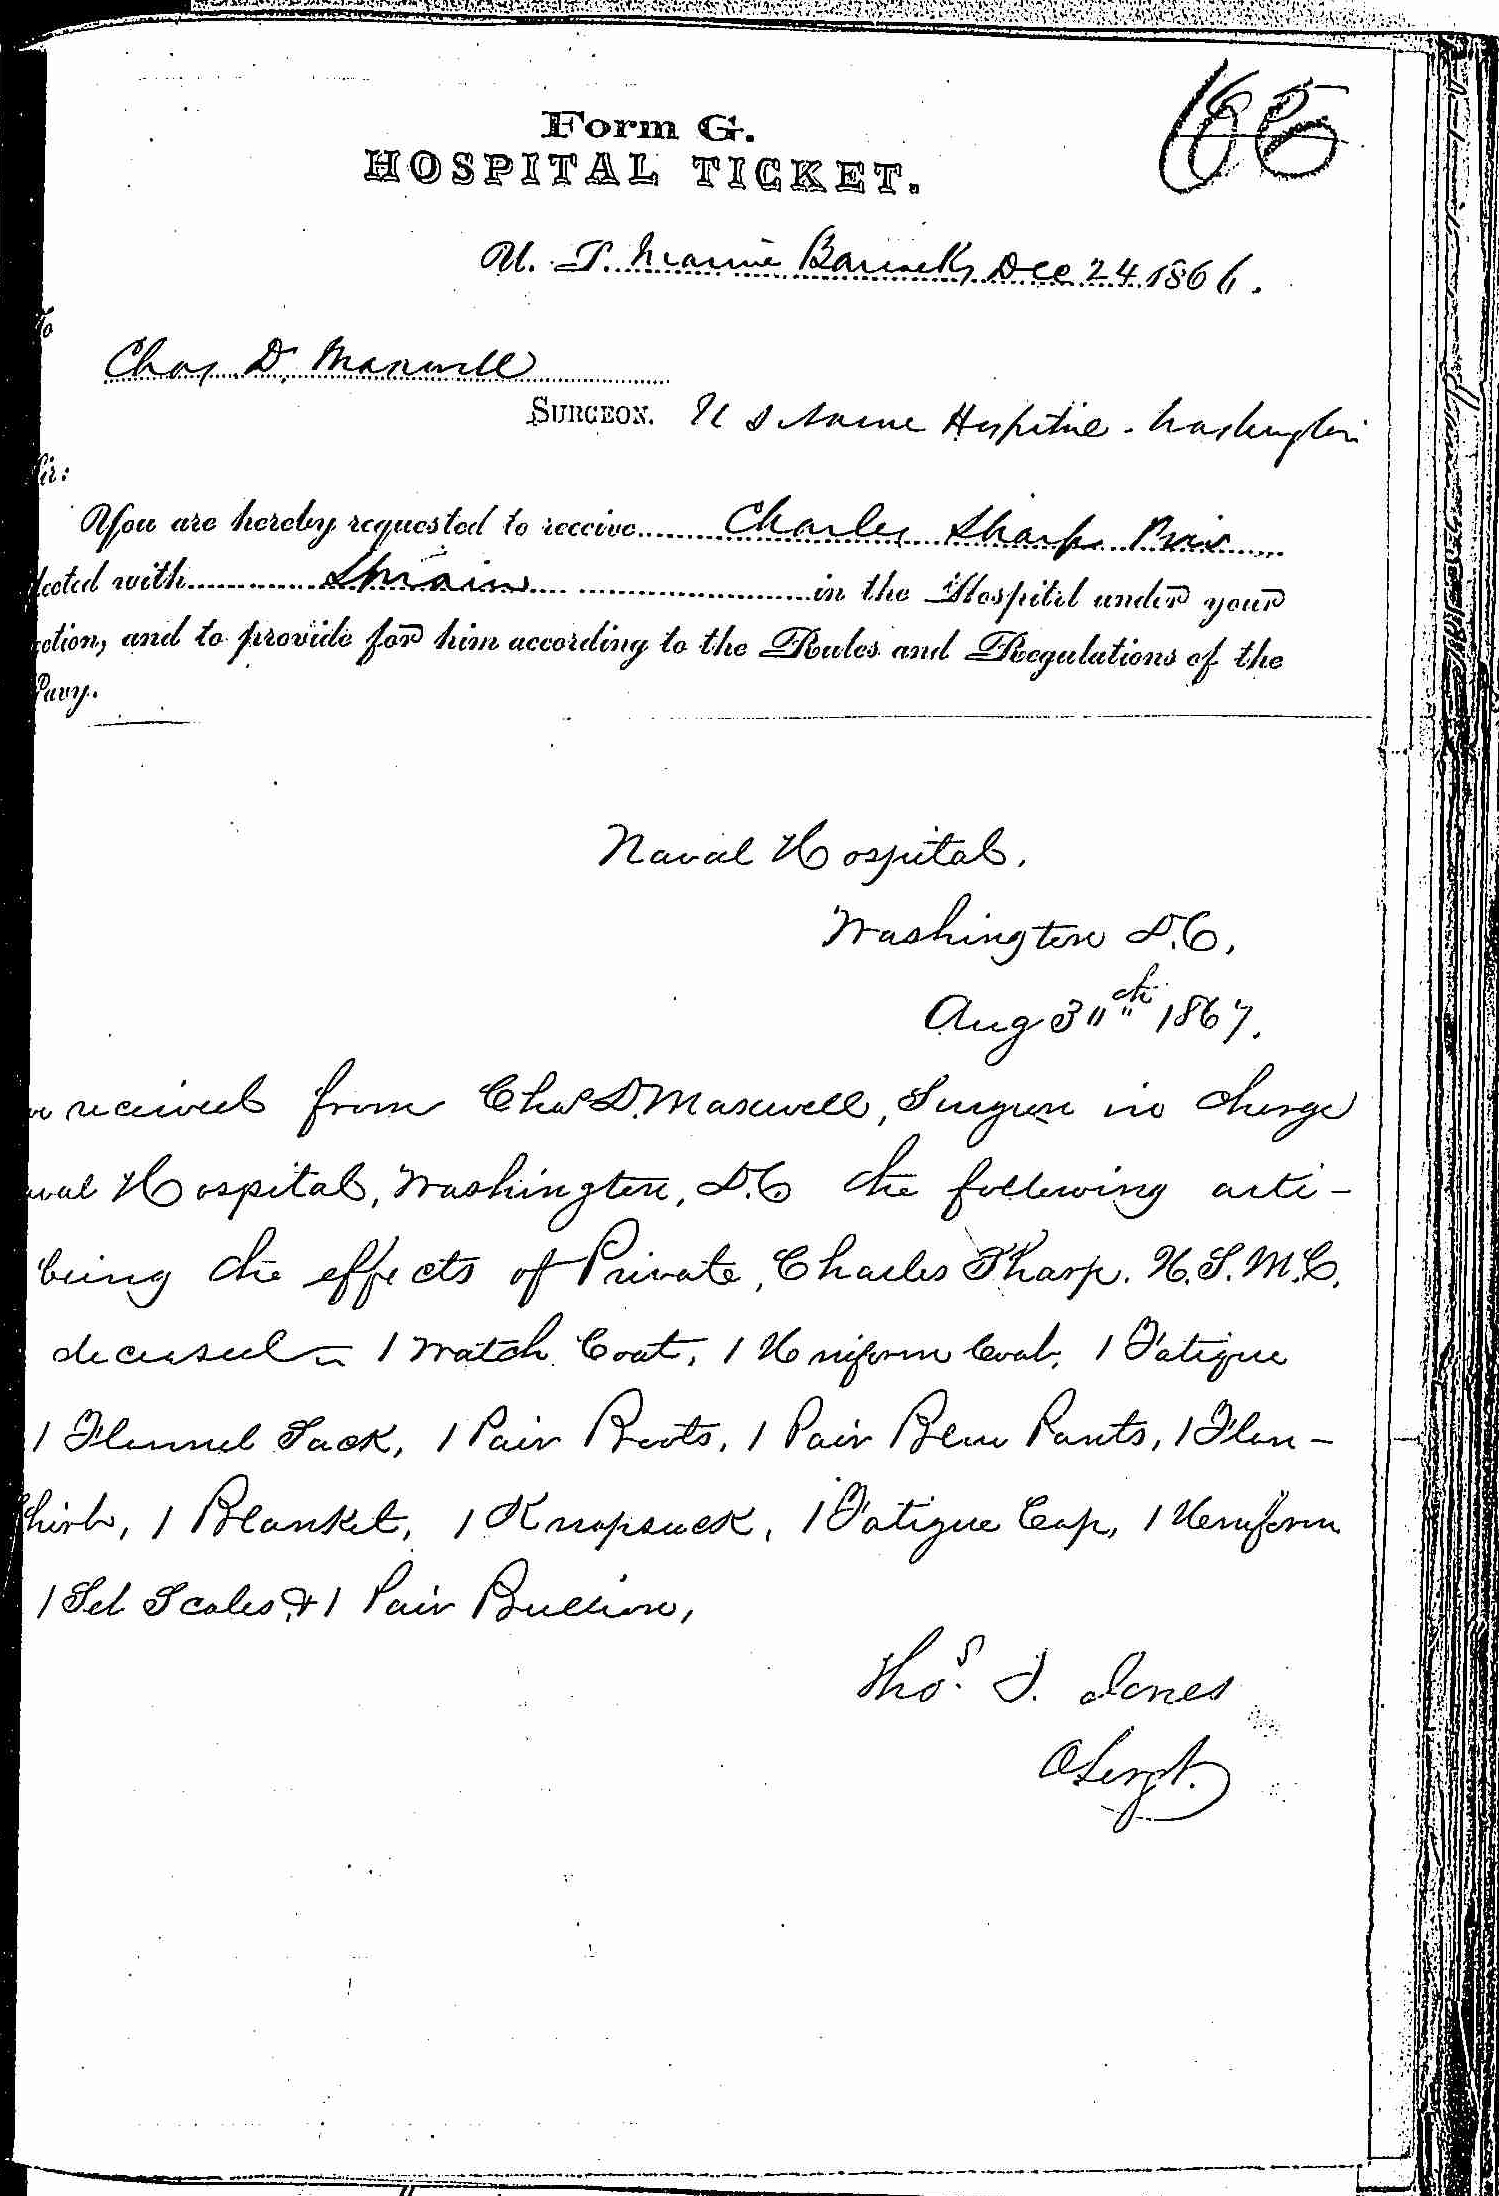 Entry for Charles Sharp (page 1 of 2) in the log Hospital Tickets and Case Papers - Naval Hospital - Washington, D.C. - 1865-68